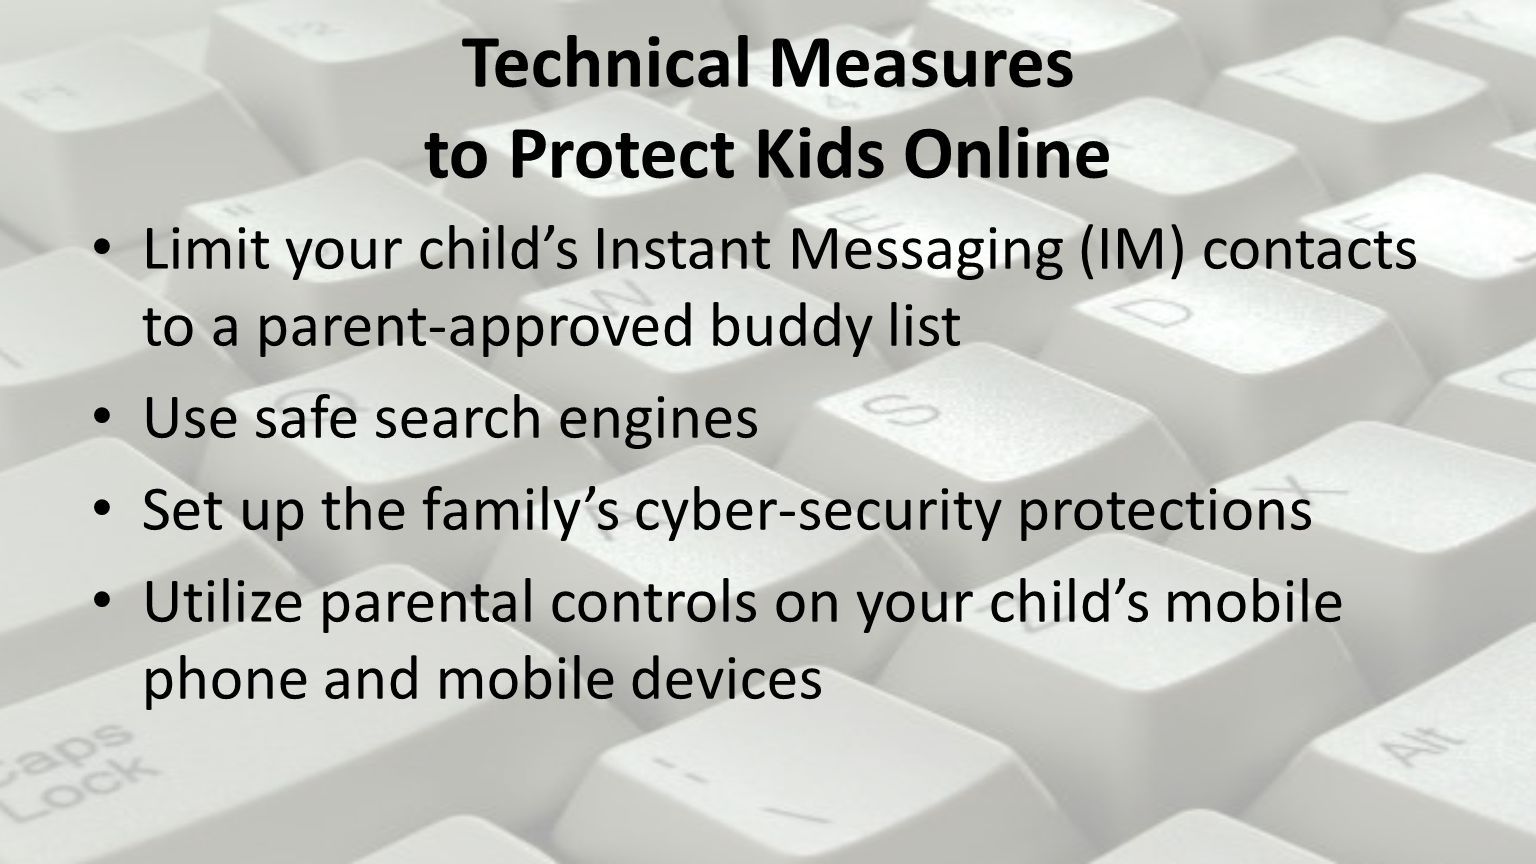 Technical Measures to Protect Kids Online Limit your child’s Instant Messaging (IM) contacts to a parent-approved buddy list Use safe search engines Set up the family’s cyber-security protections Utilize parental controls on your child’s mobile phone and mobile devices